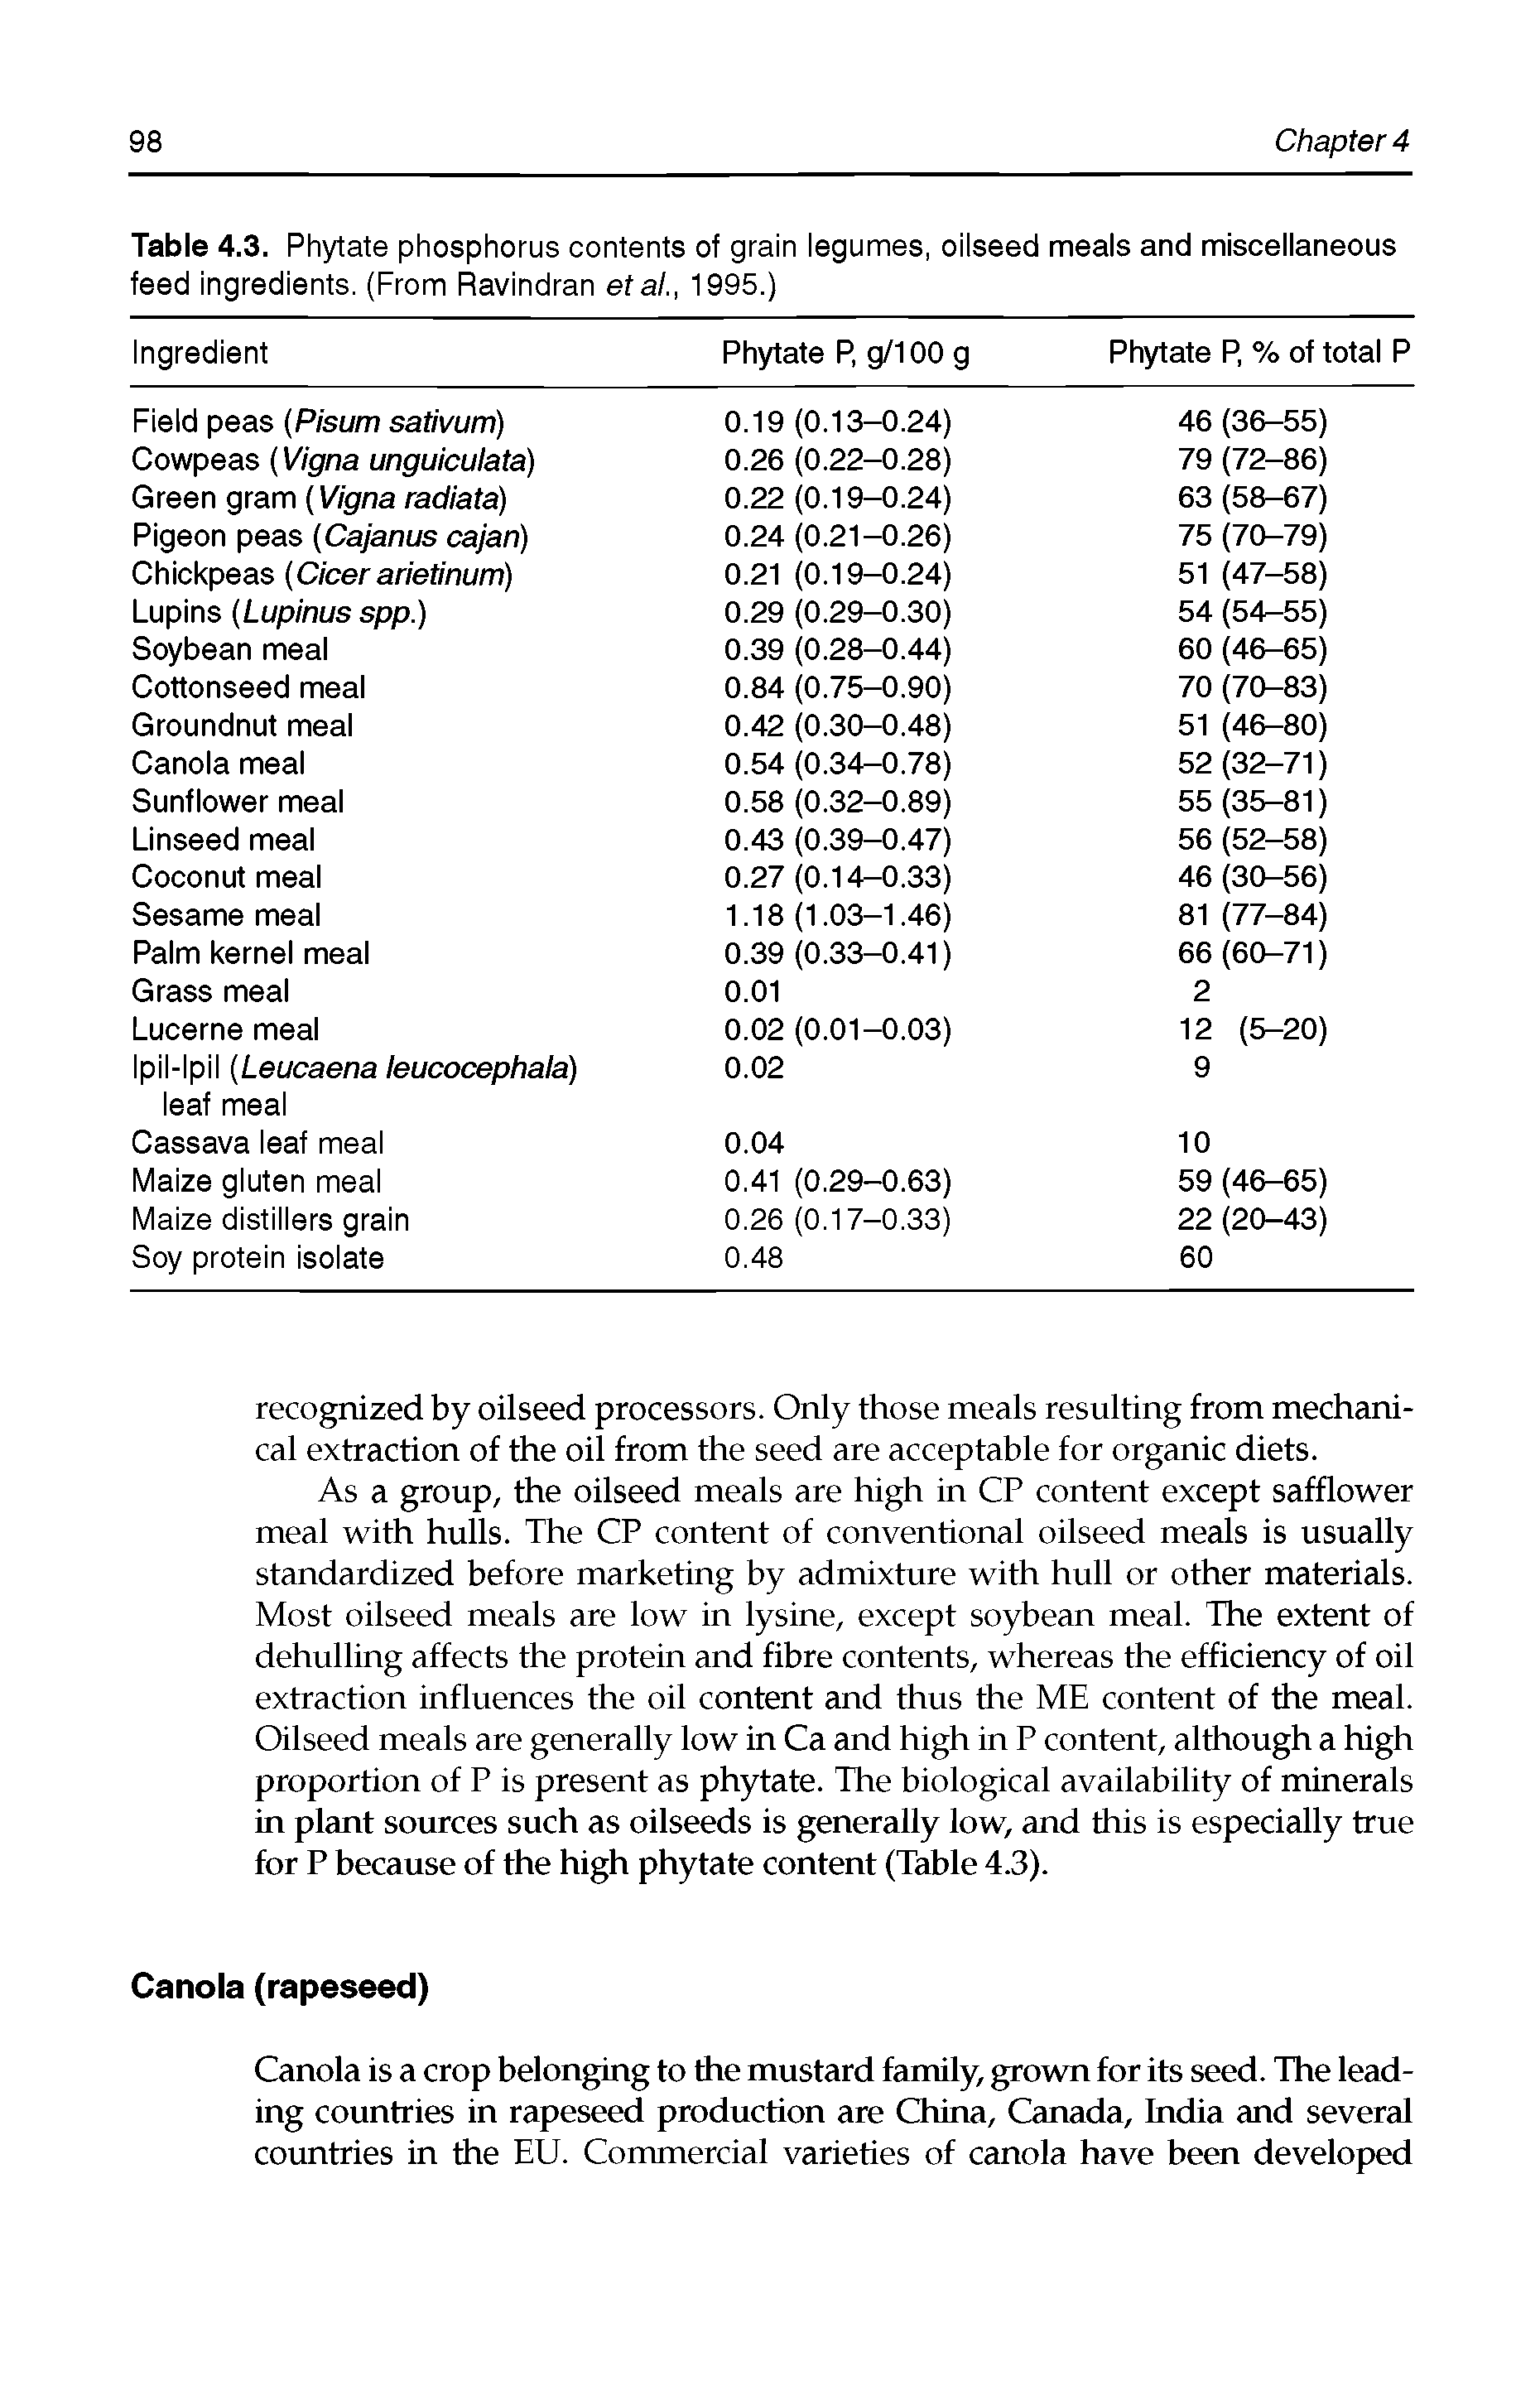 Table 4.3. Phytate phosphorus contents of grain legumes, oilseed meals and miscellaneous feed ingredients. (From Ravindran etal., 1995.) ...